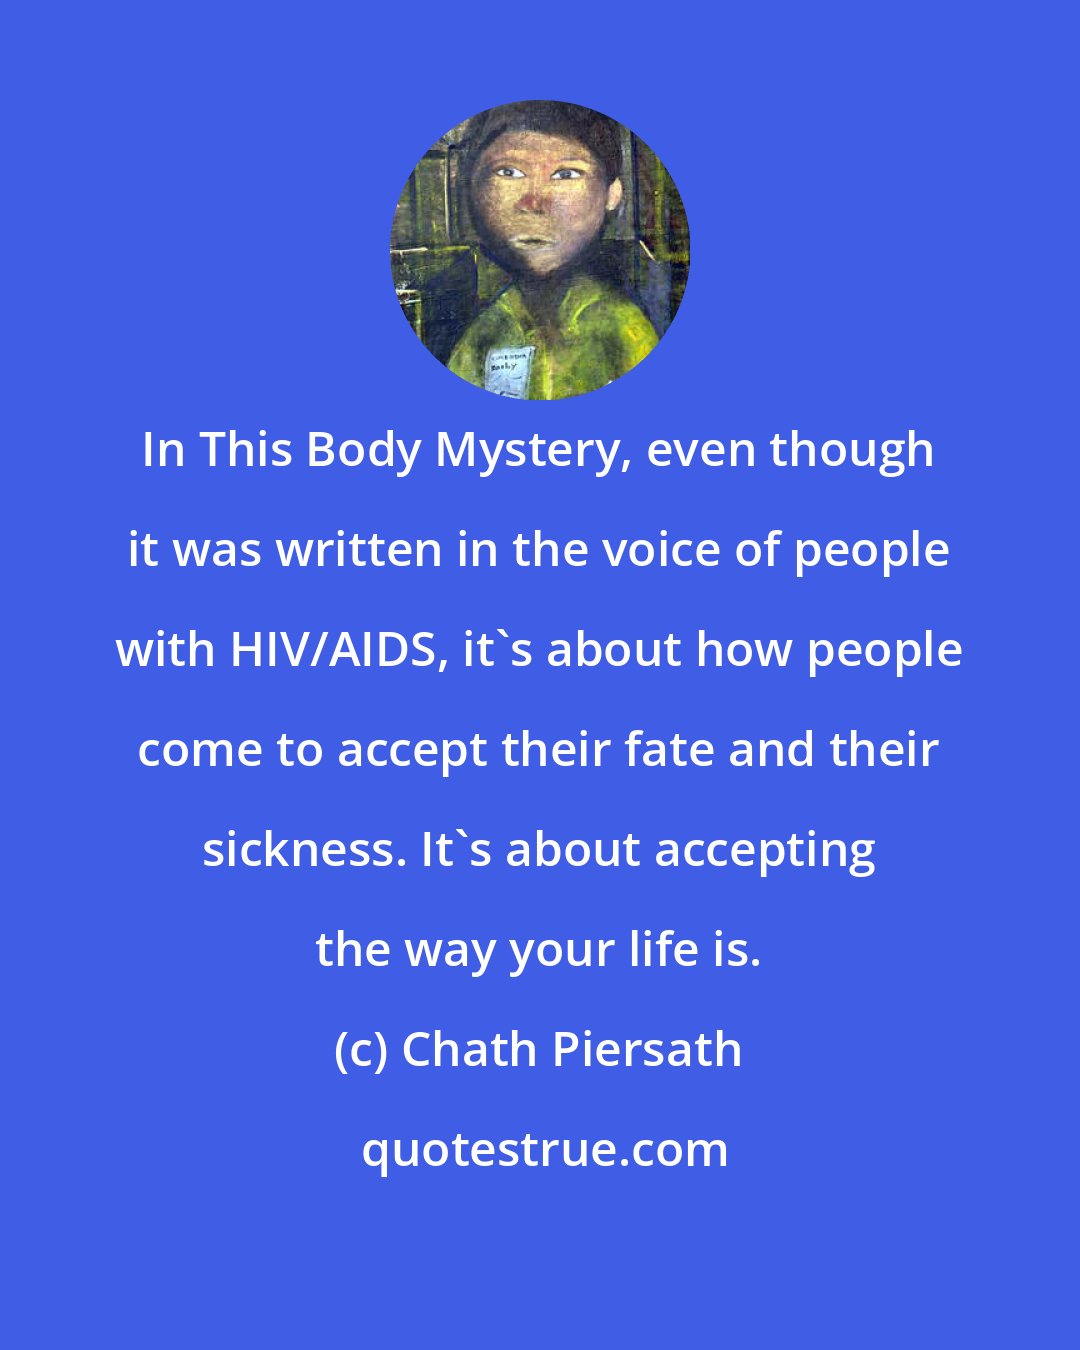 Chath Piersath: In This Body Mystery, even though it was written in the voice of people with HIV/AIDS, it's about how people come to accept their fate and their sickness. It's about accepting the way your life is.